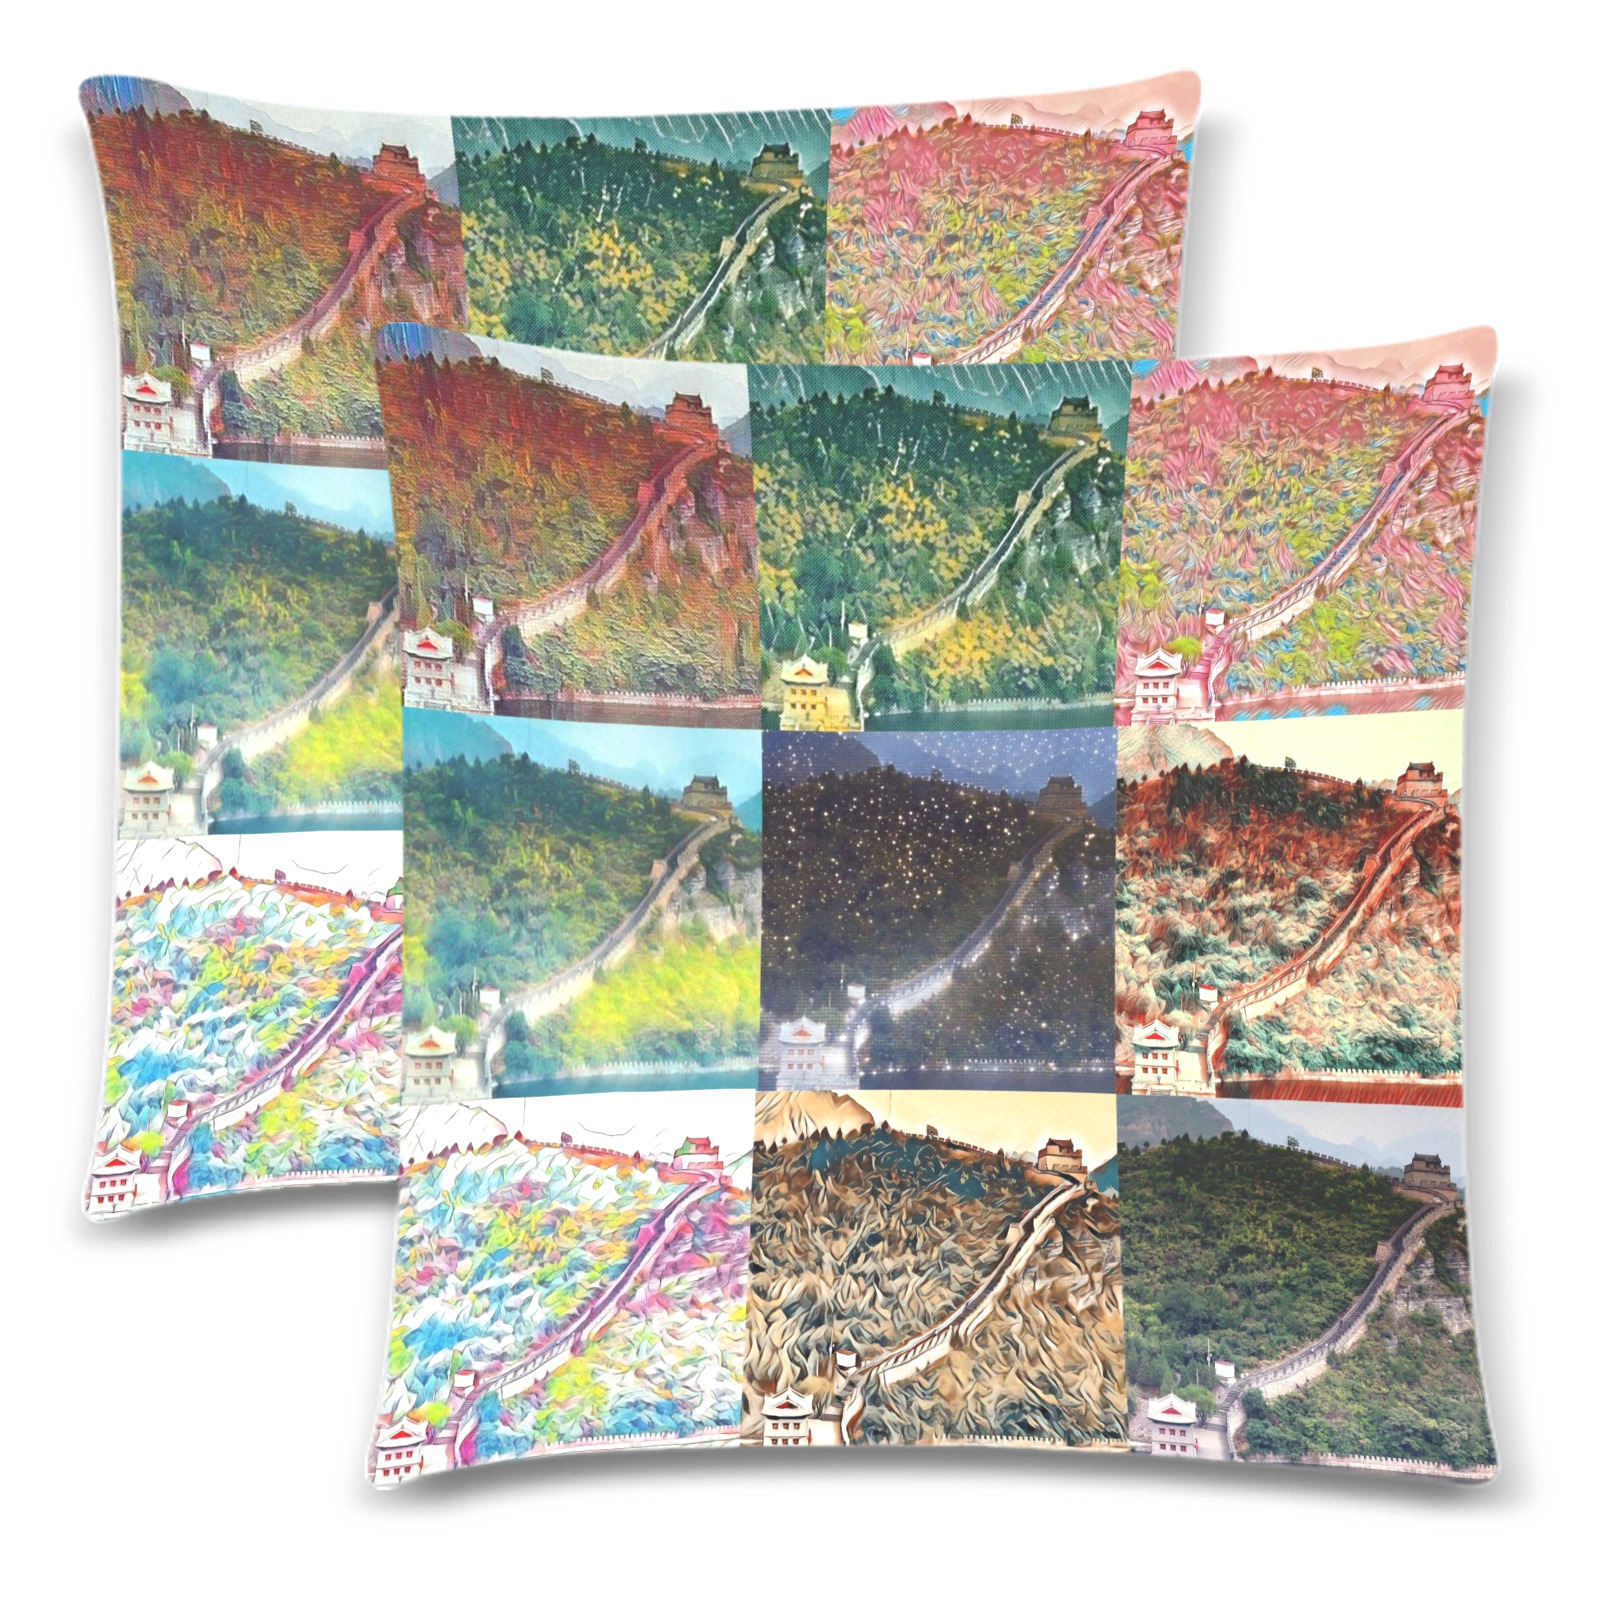 Great Wall of China, China Collage Custom Zippered Pillow Cases 18"x 18" (Twin Sides) (Set of 2)